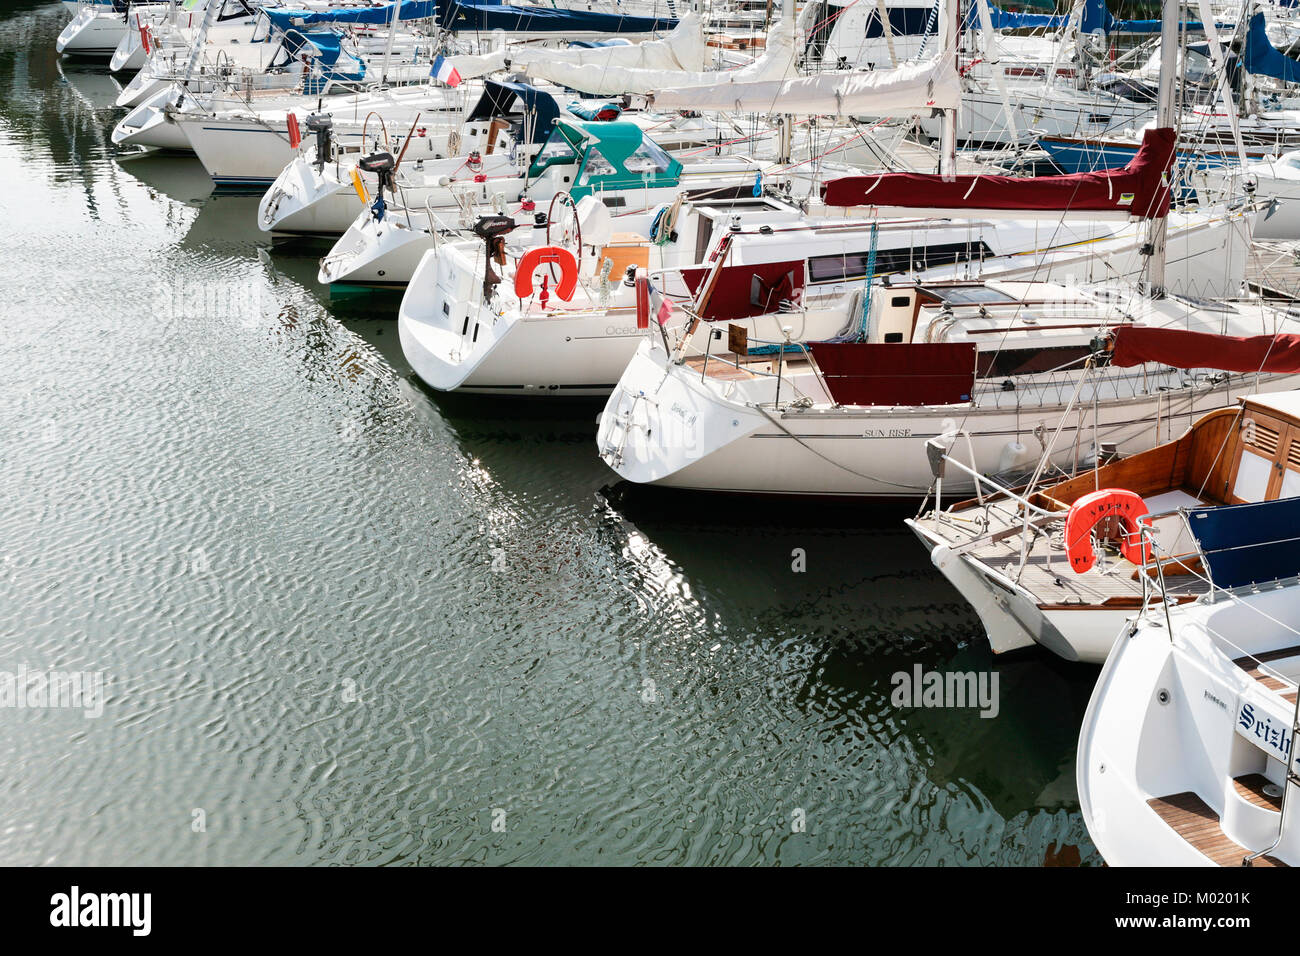 PAIMPOL, FRANCE - JULY 6, 2010: boat in port of Paimpol city. Paimpol is a commune in the Cotes-d'Armor department in Brittany on coast of English Cha Stock Photo